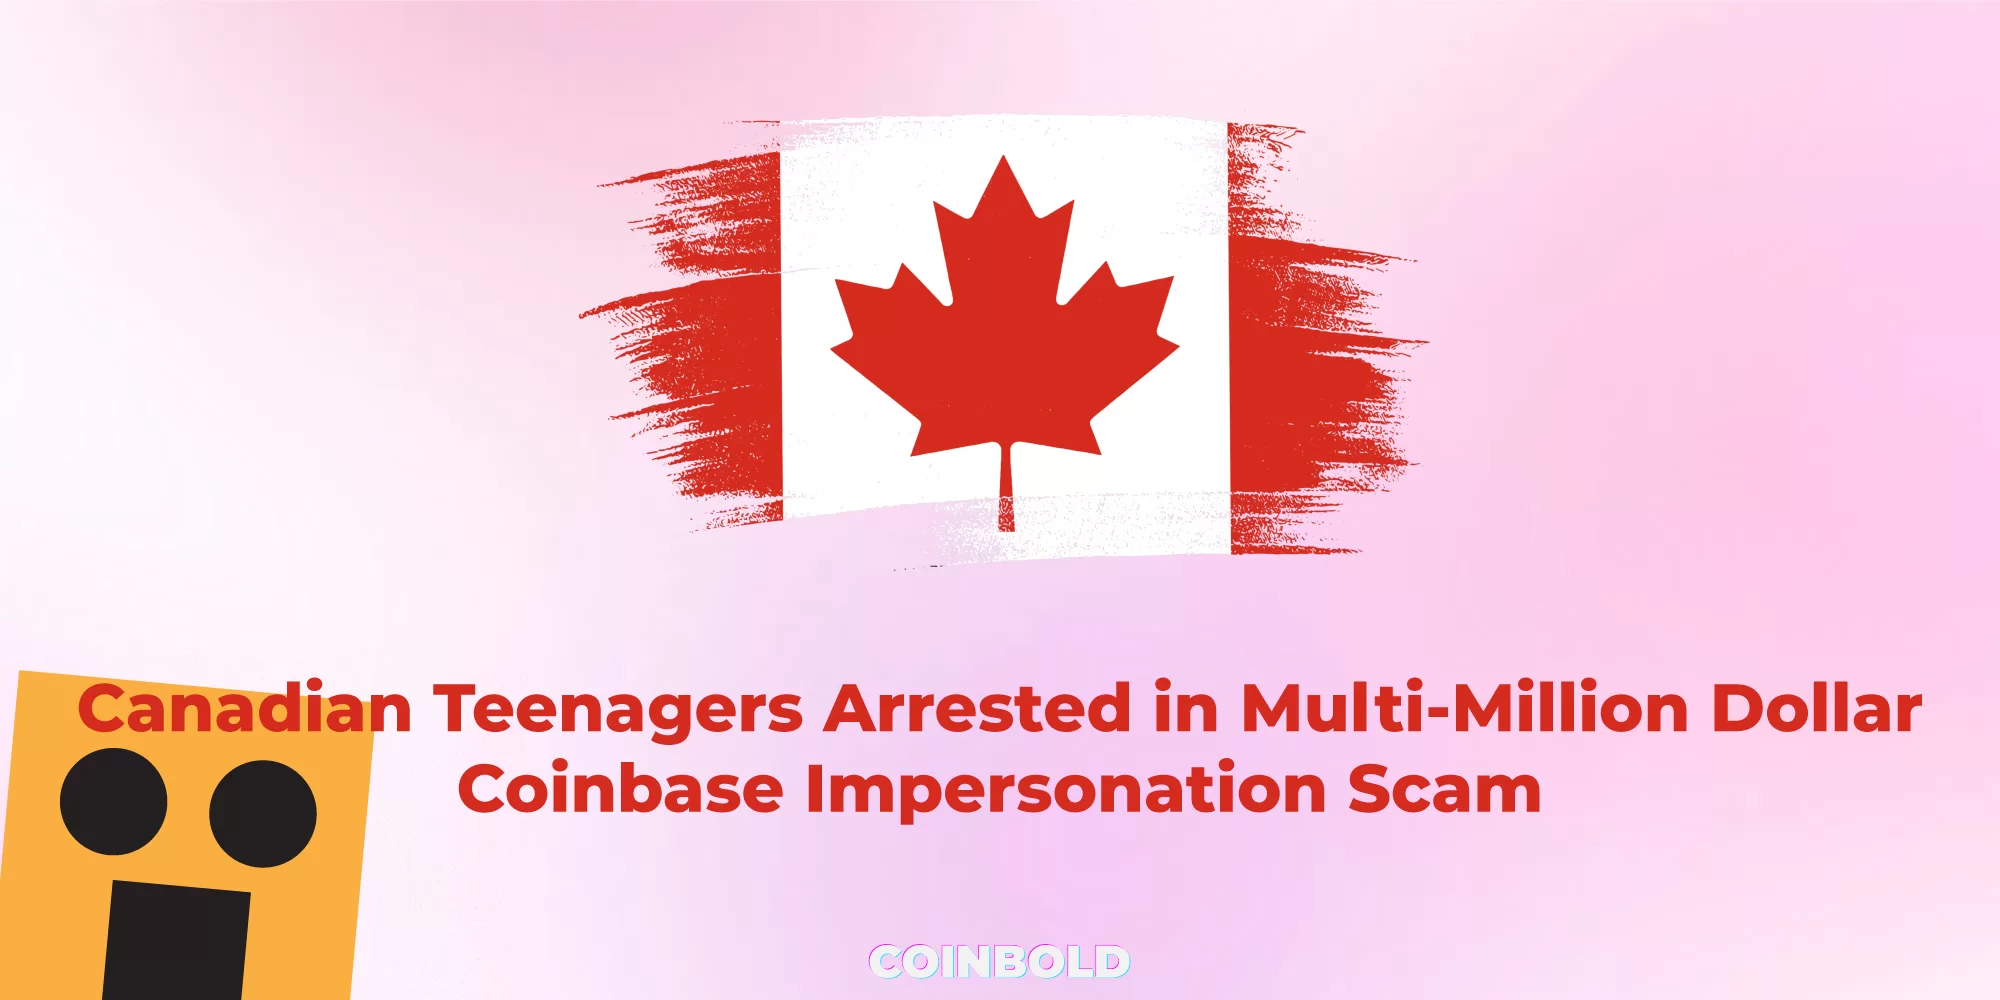 Canadian Teenagers Arrested in Multi-Million Dollar Coinbase Impersonation Scam